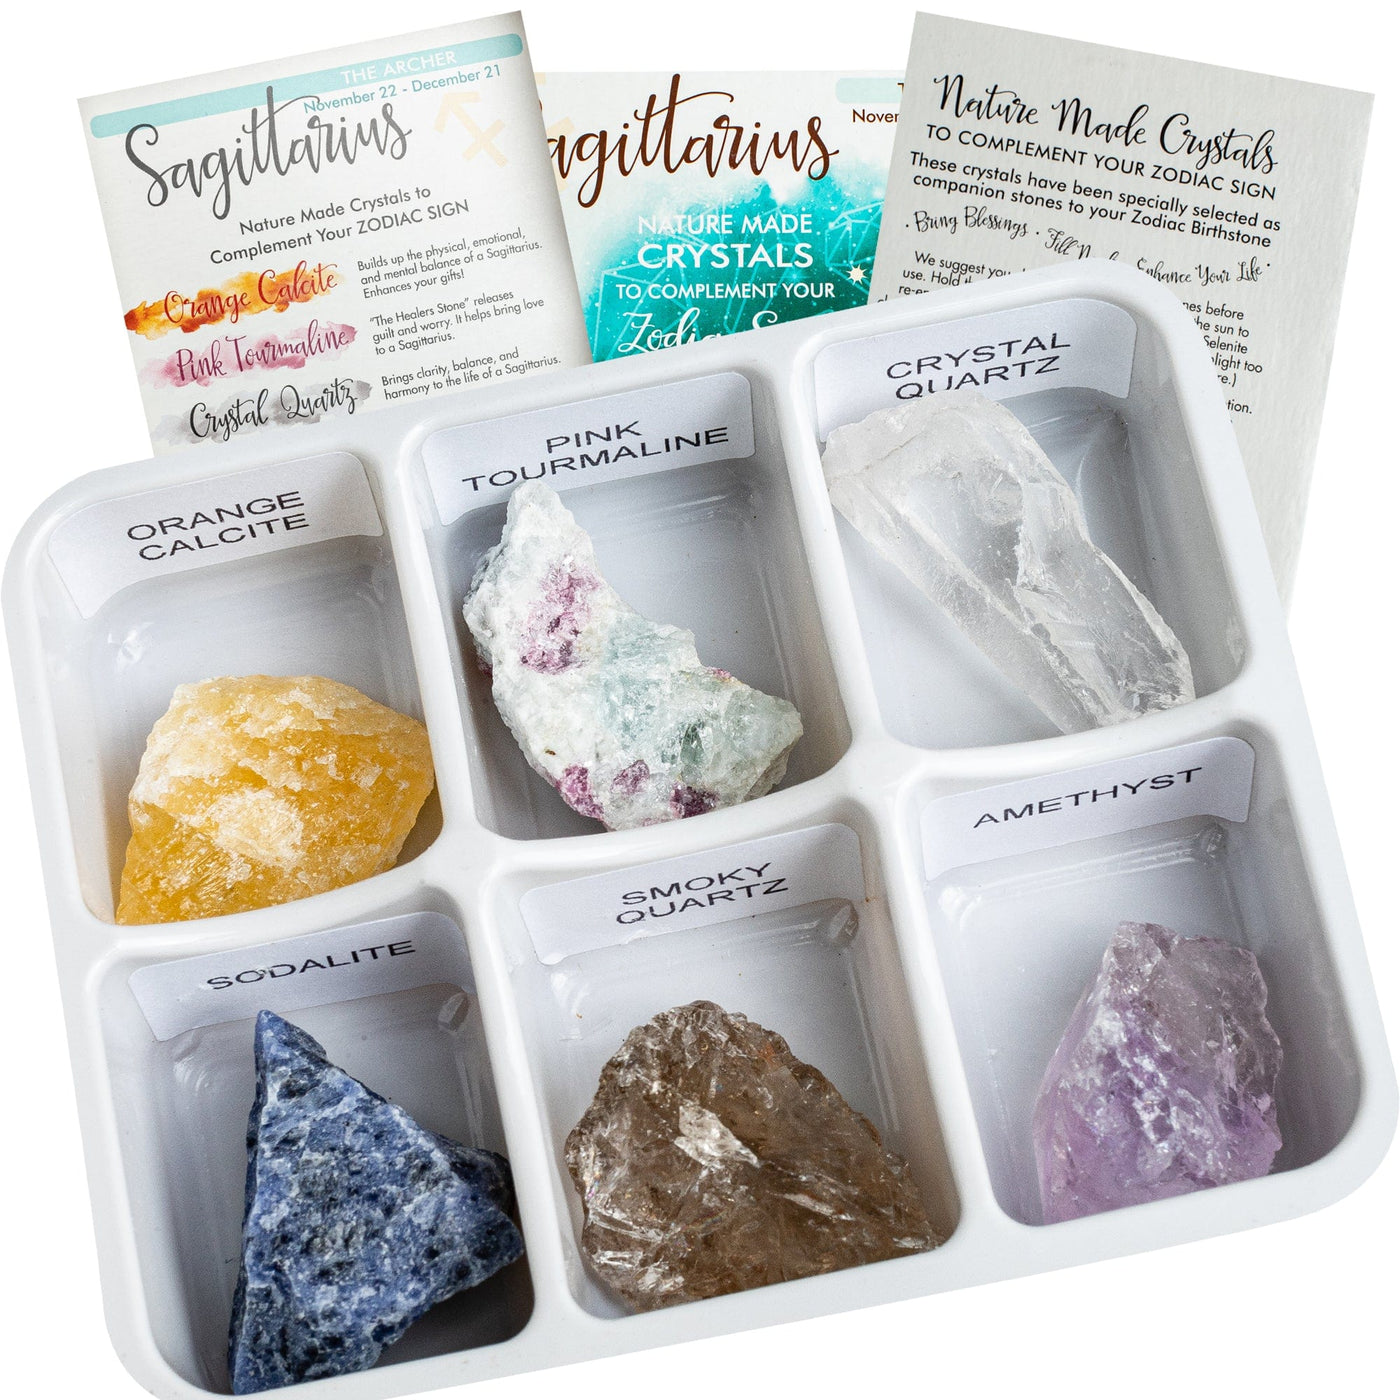 Photo of six crystals contained in the Sagittarius horoscope box.